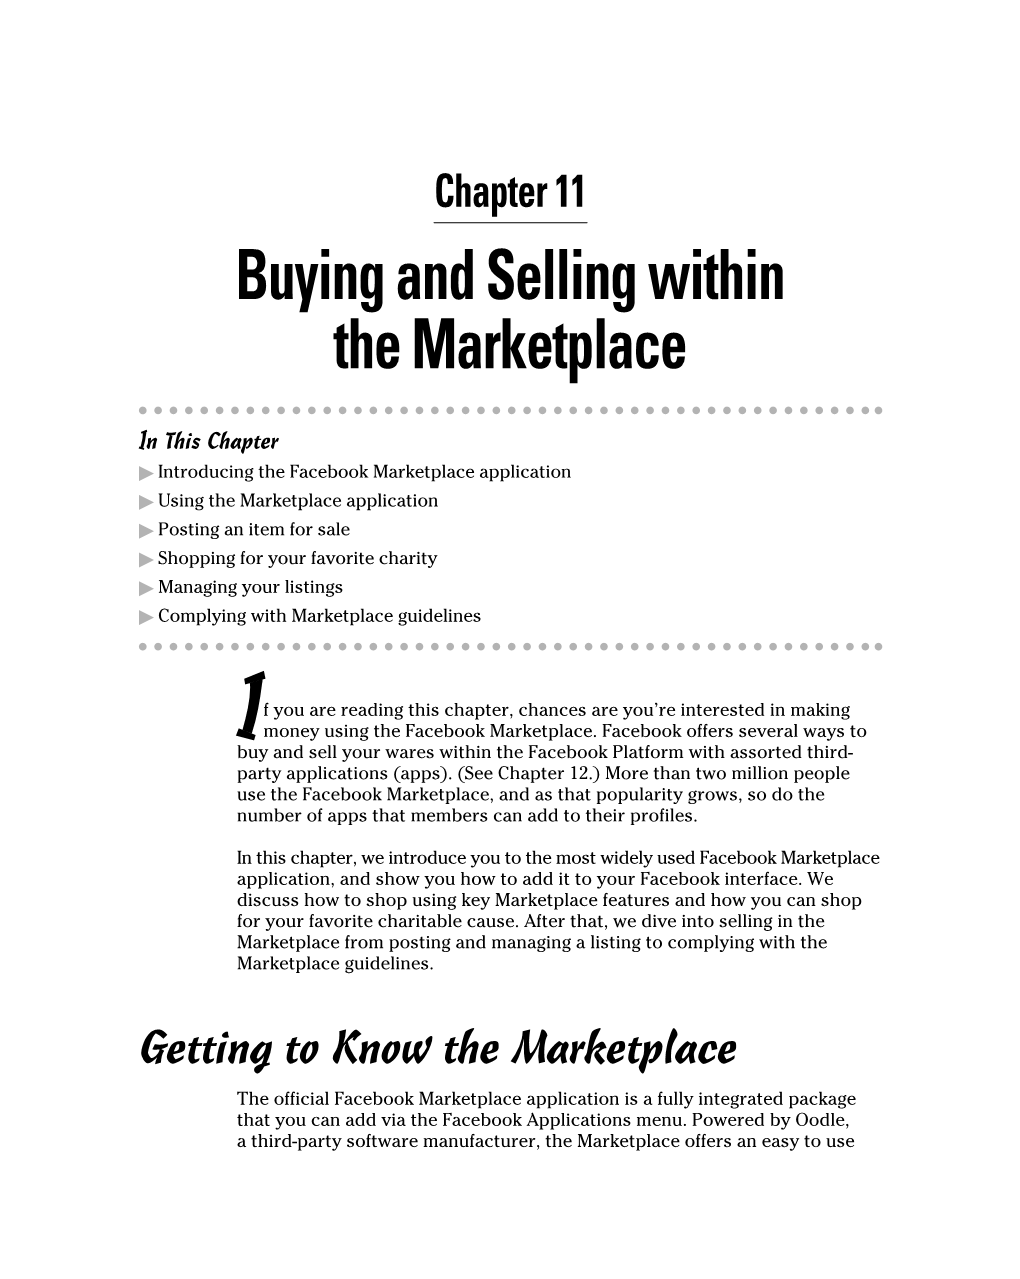 Buying and Selling Within the Marketplace